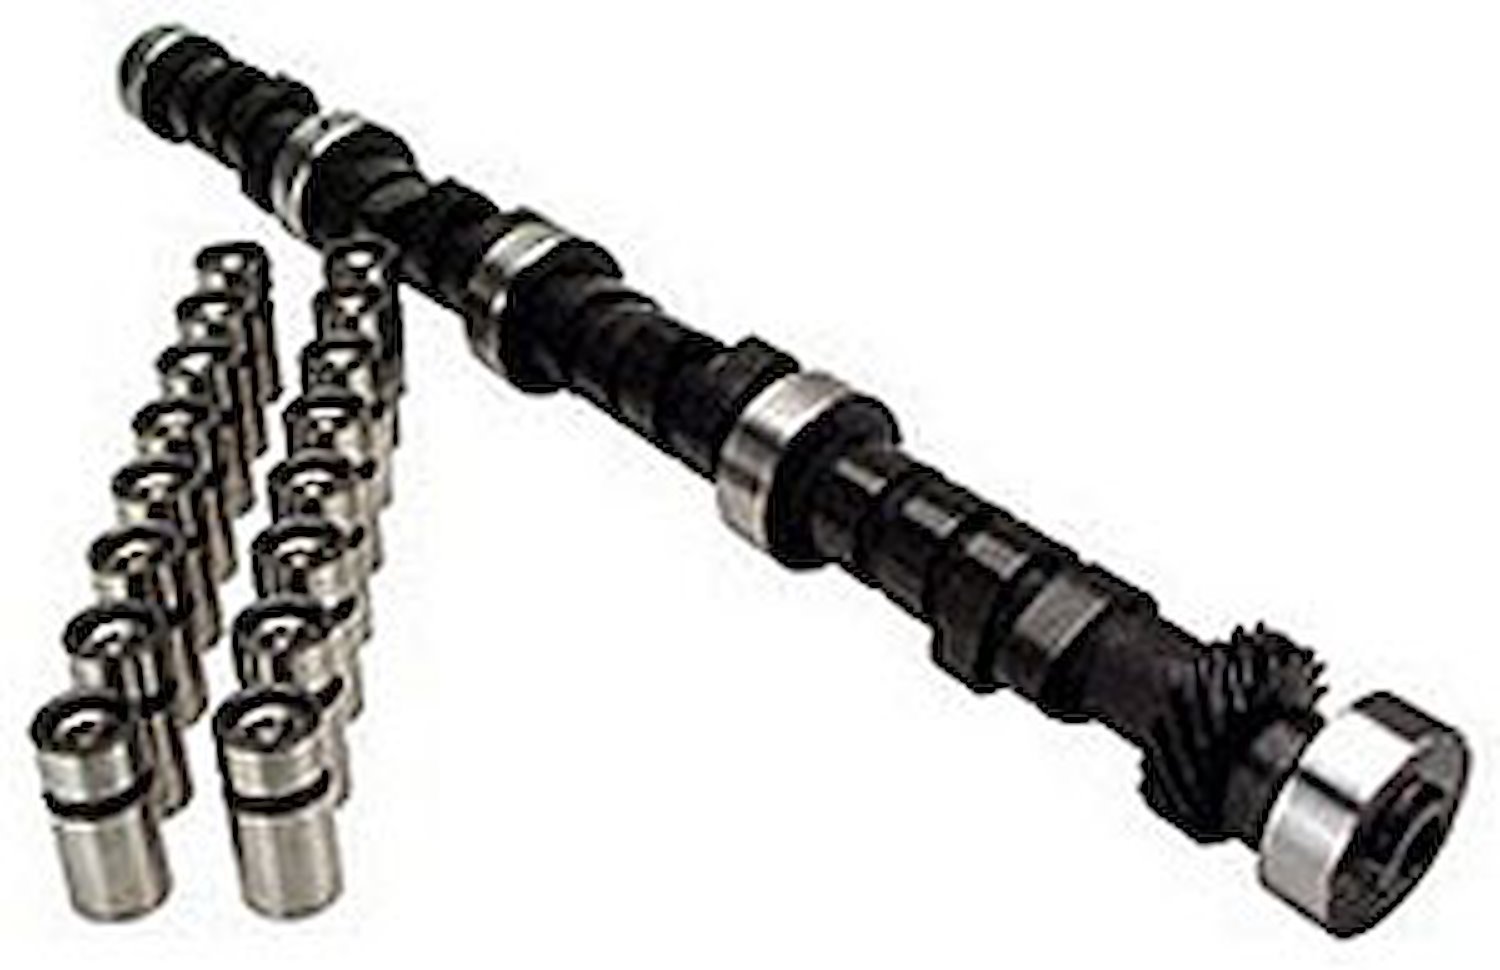 Thumpr Hydraulic Flat Tappet Camshaft and Lifter Kit Single-Bolt Lift .486"/.473" Duration 279/296 RPM Range 2000-5800